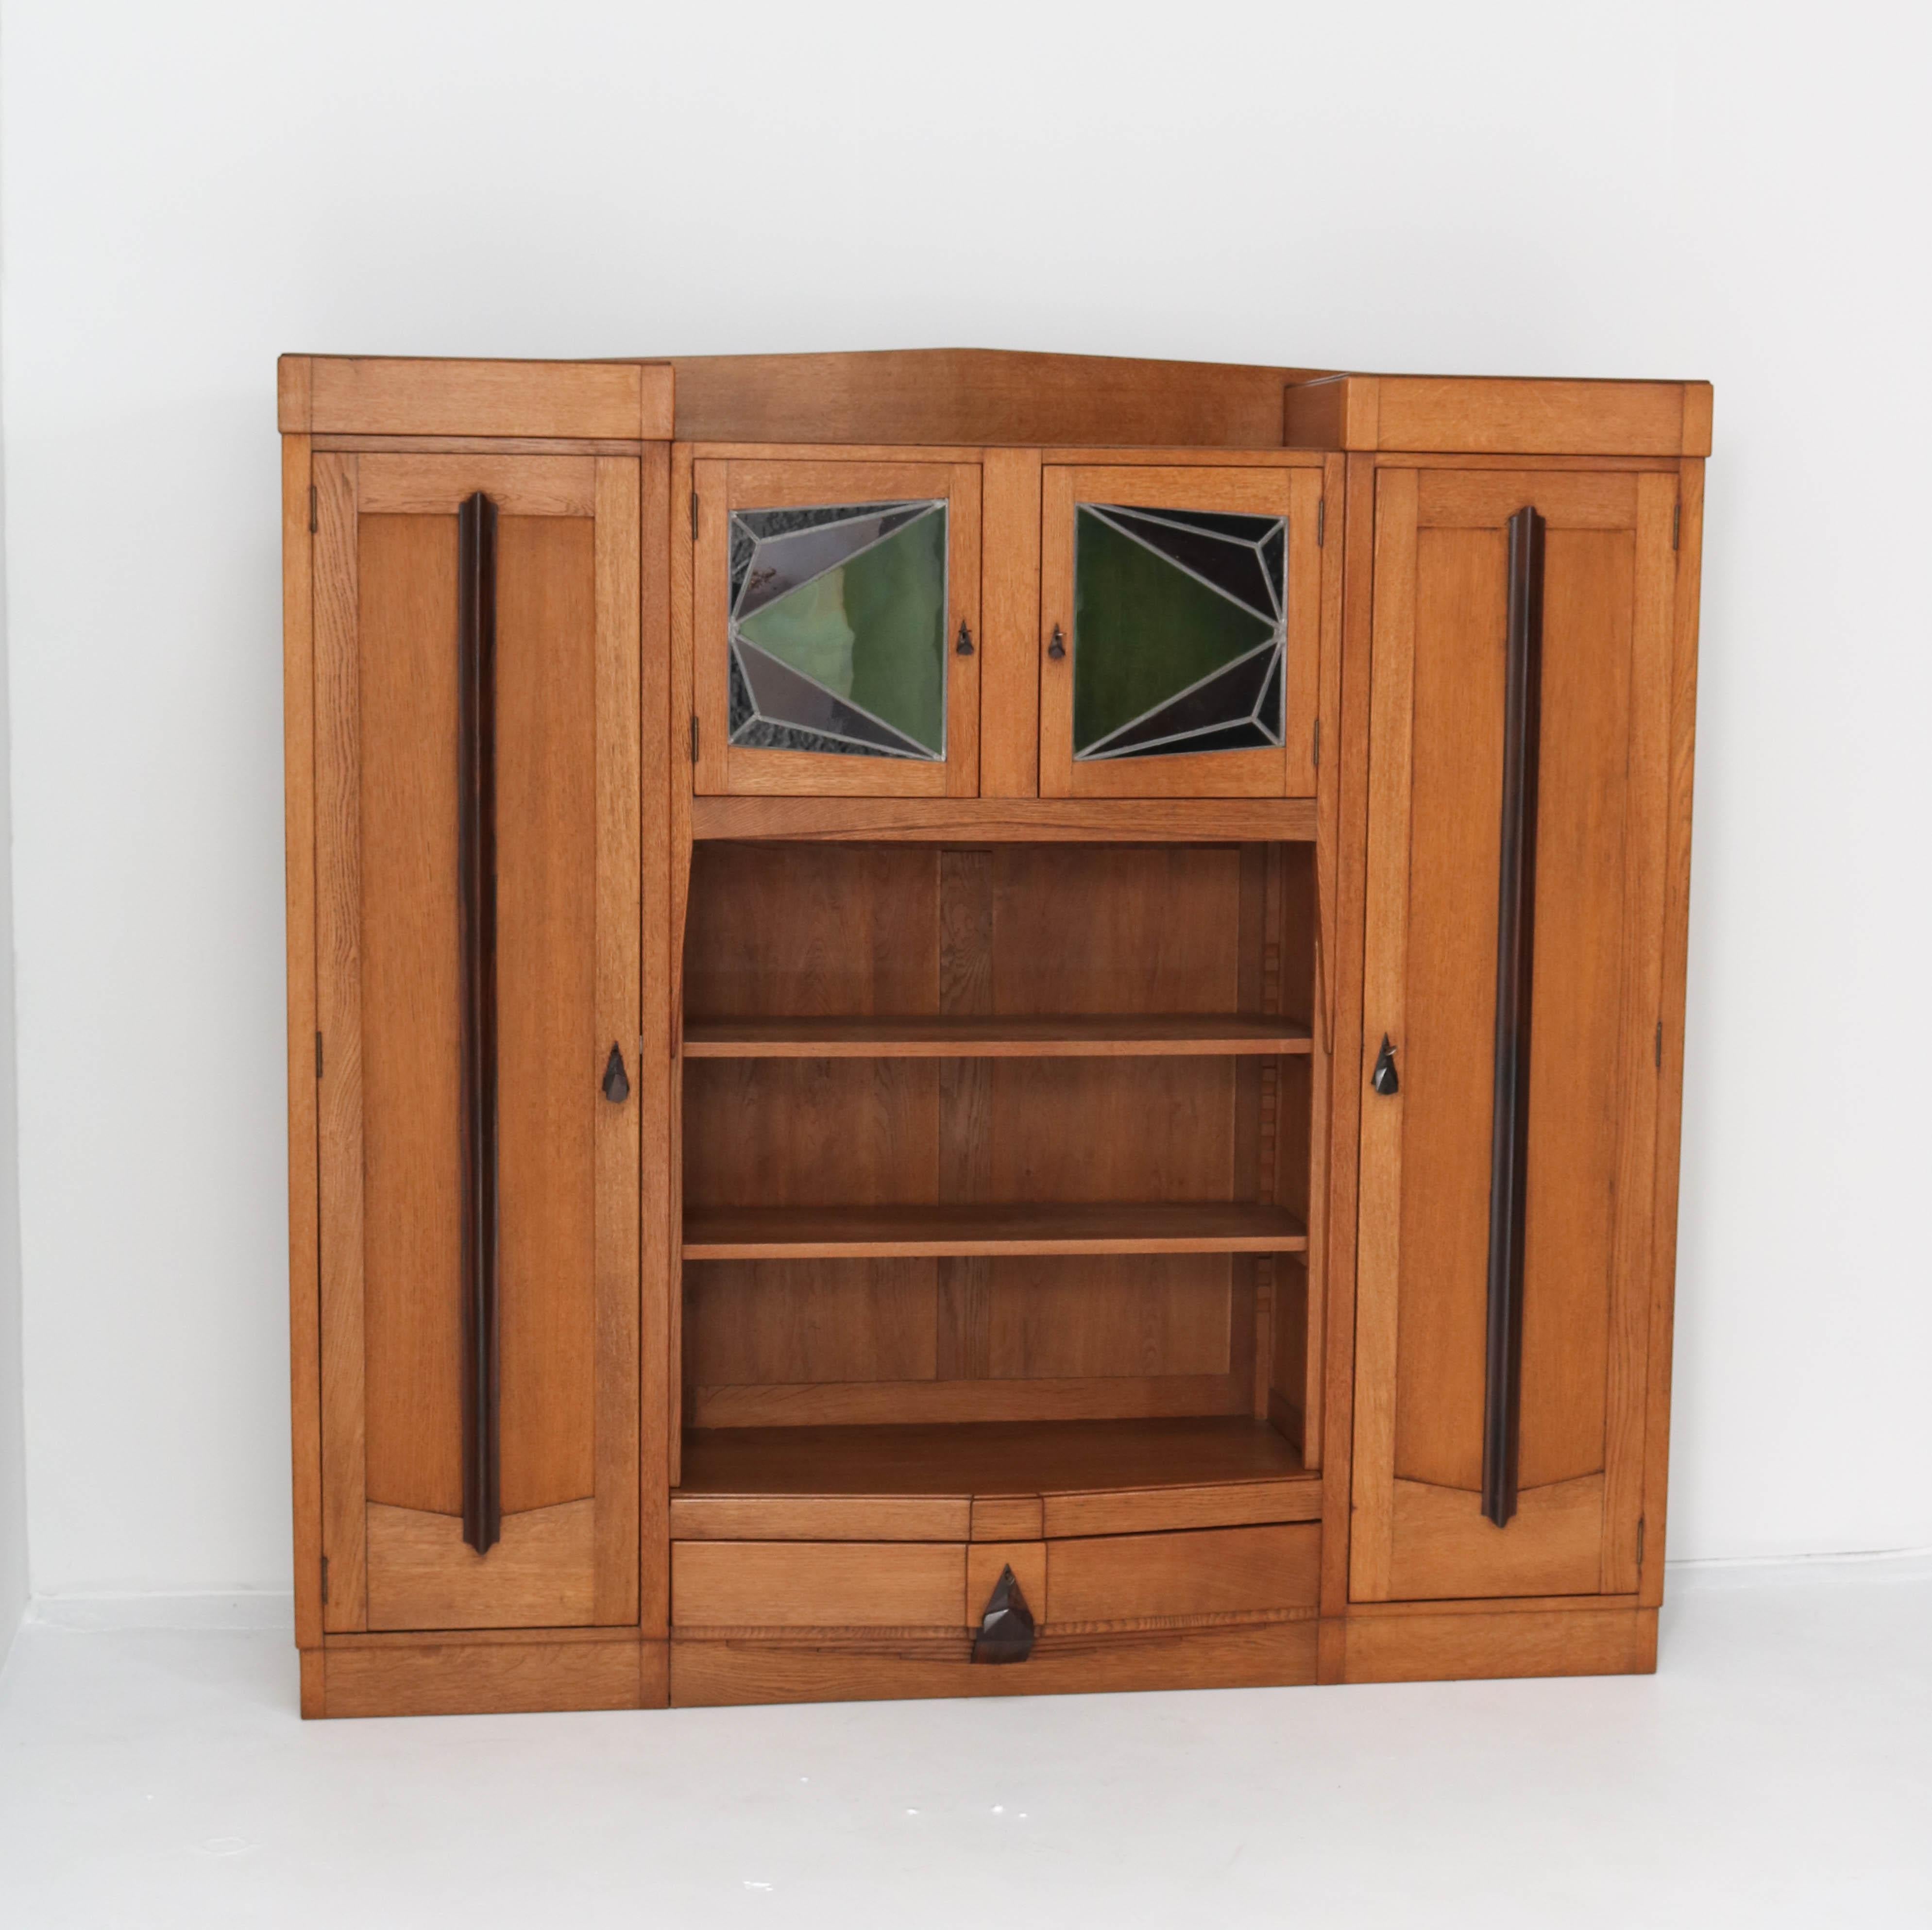 Magnificent and rare Art Deco Amsterdam School bookcase.
Striking Dutch design from the 1920s.
Solid oak with original Macassar ebony handles and lining.
The two small doors still have the original stained glass.
Ten original solid oak shelves